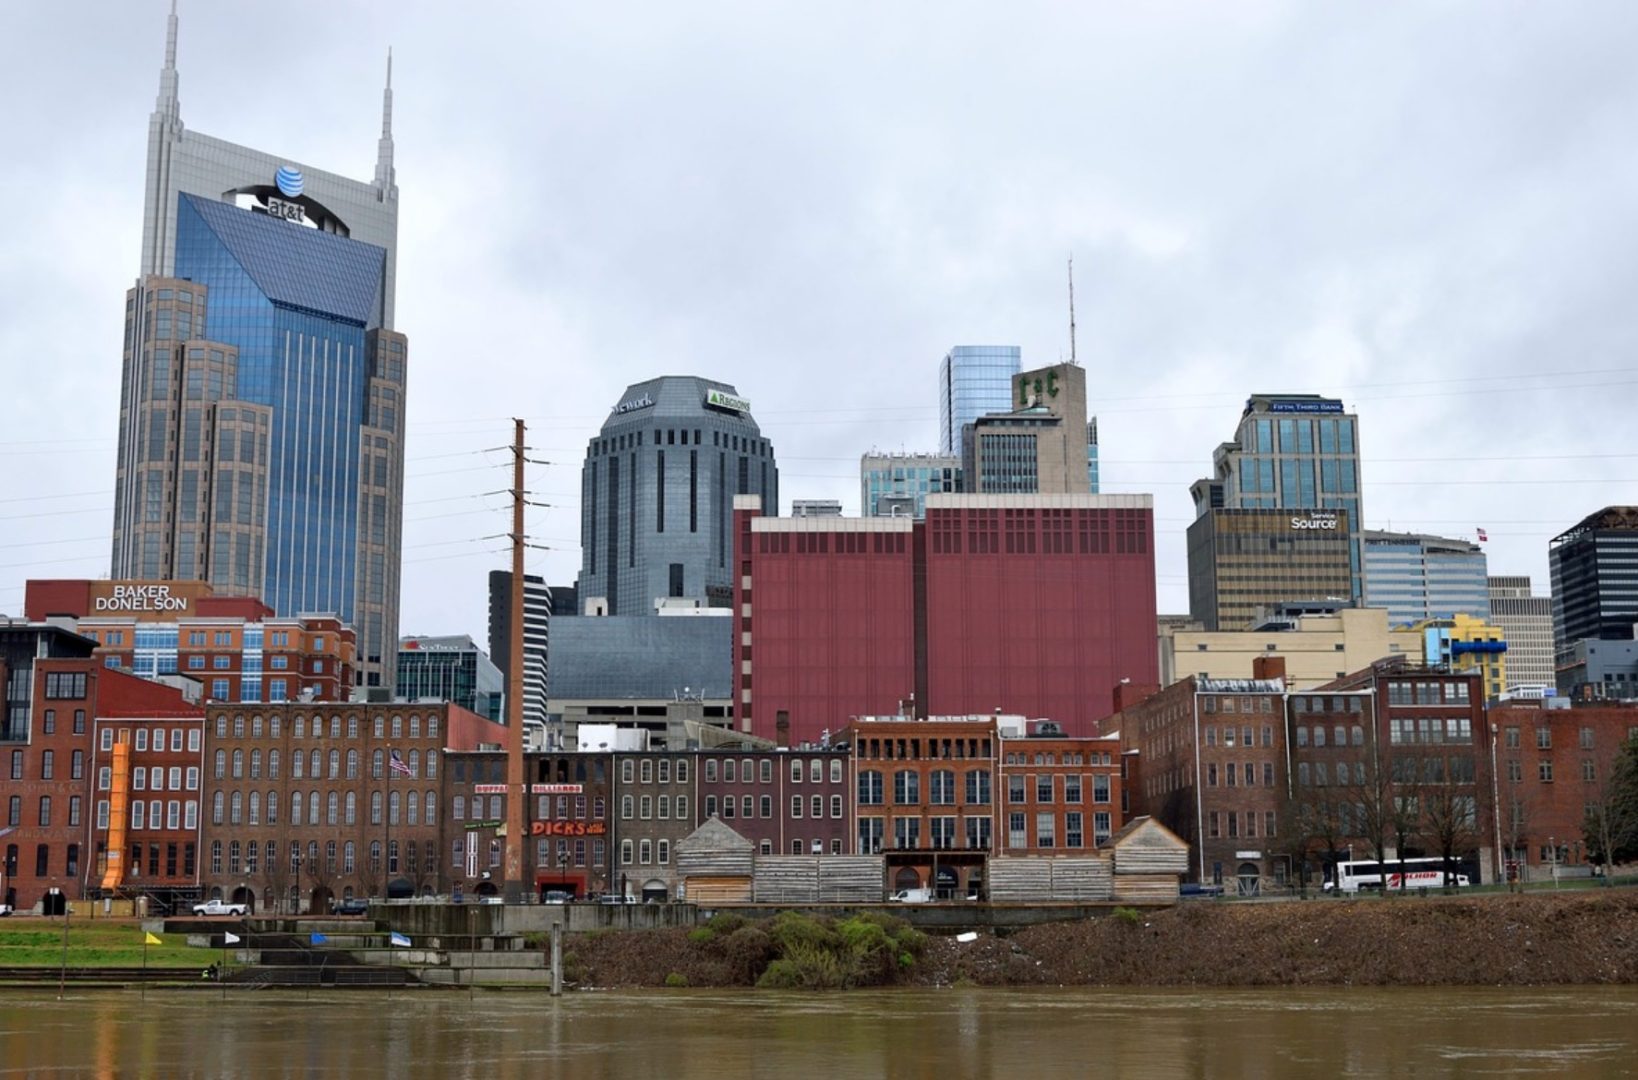 City of Nashville, T-Square Engineering provides engineering design in Nashville, TN, Brentwood, TN and Franklin, TN.